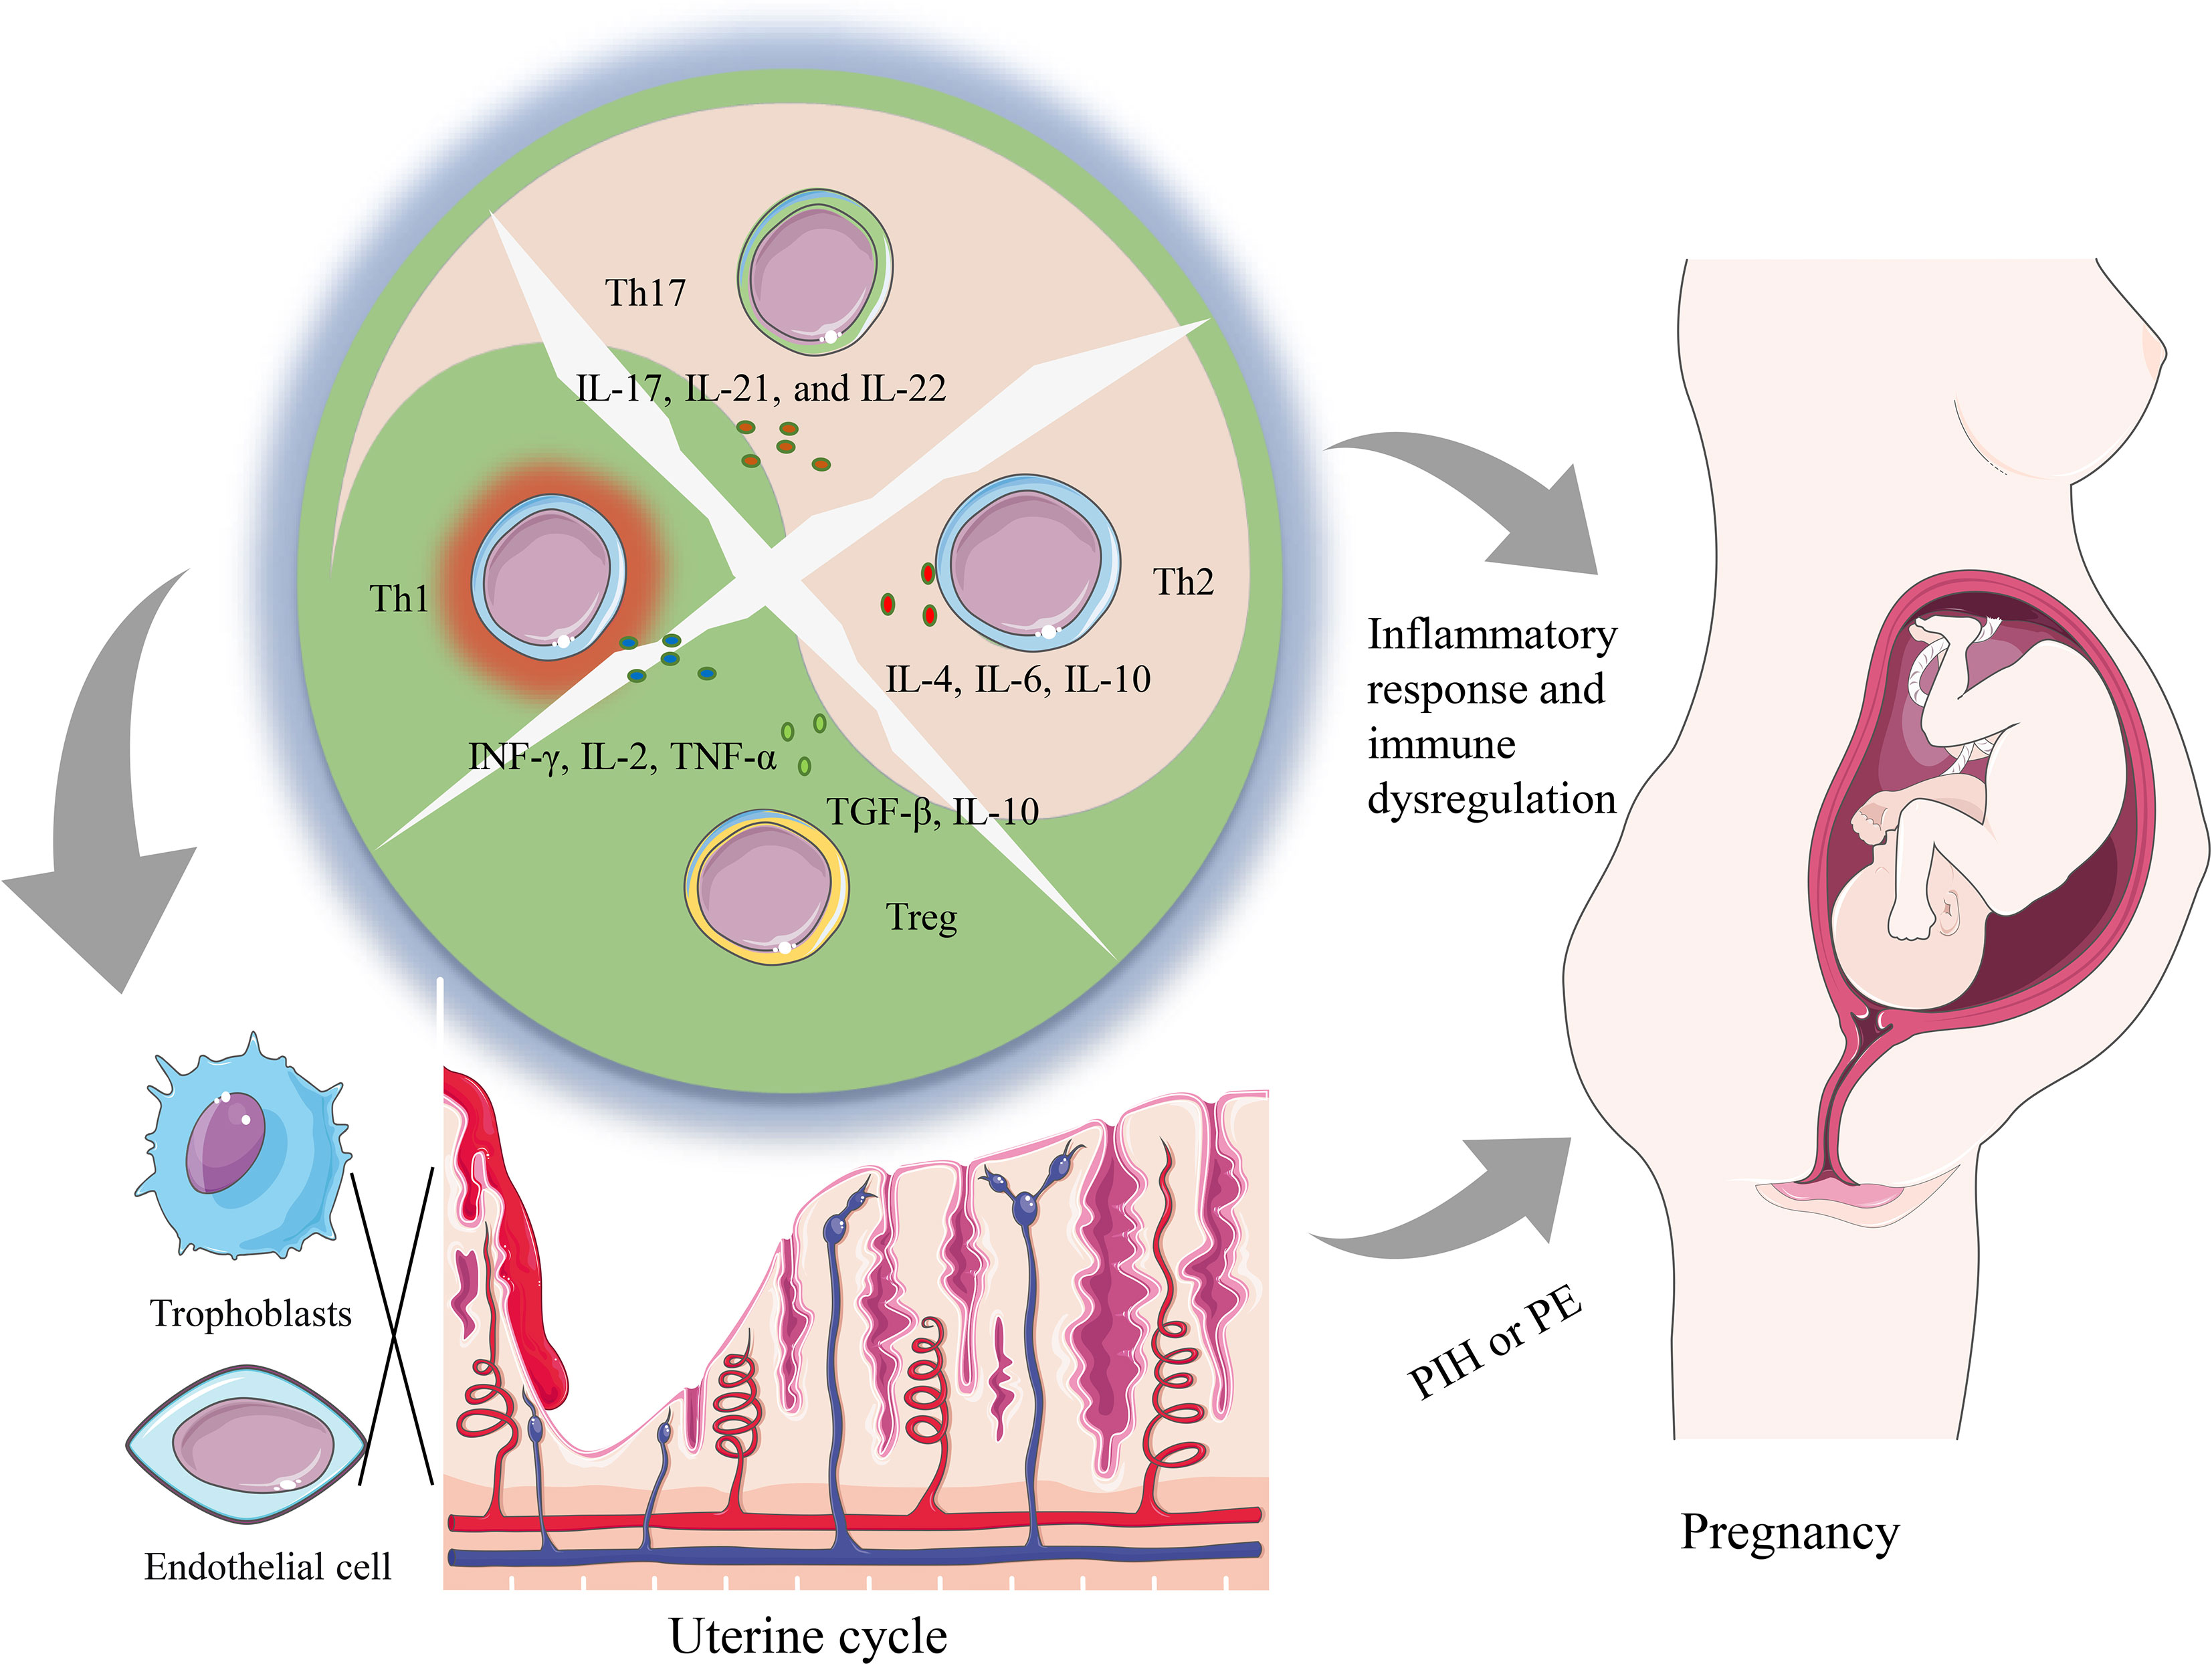 Hypertension in Pregnancy: Current Perspective